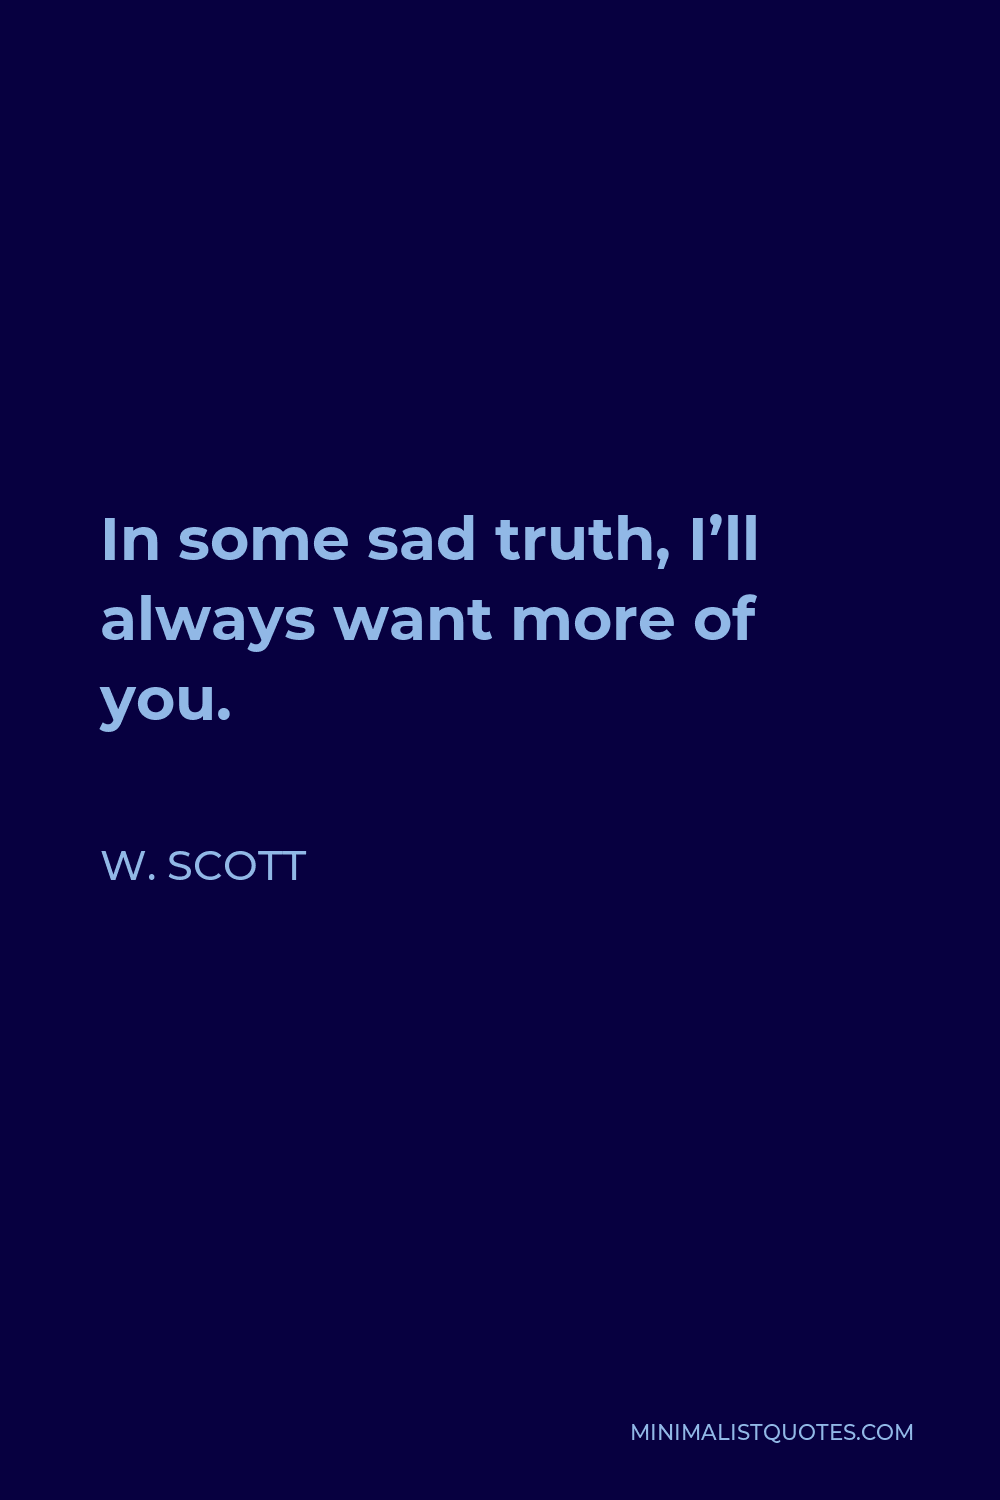 W. Scott Quote - In some sad truth, I’ll always want more of you.